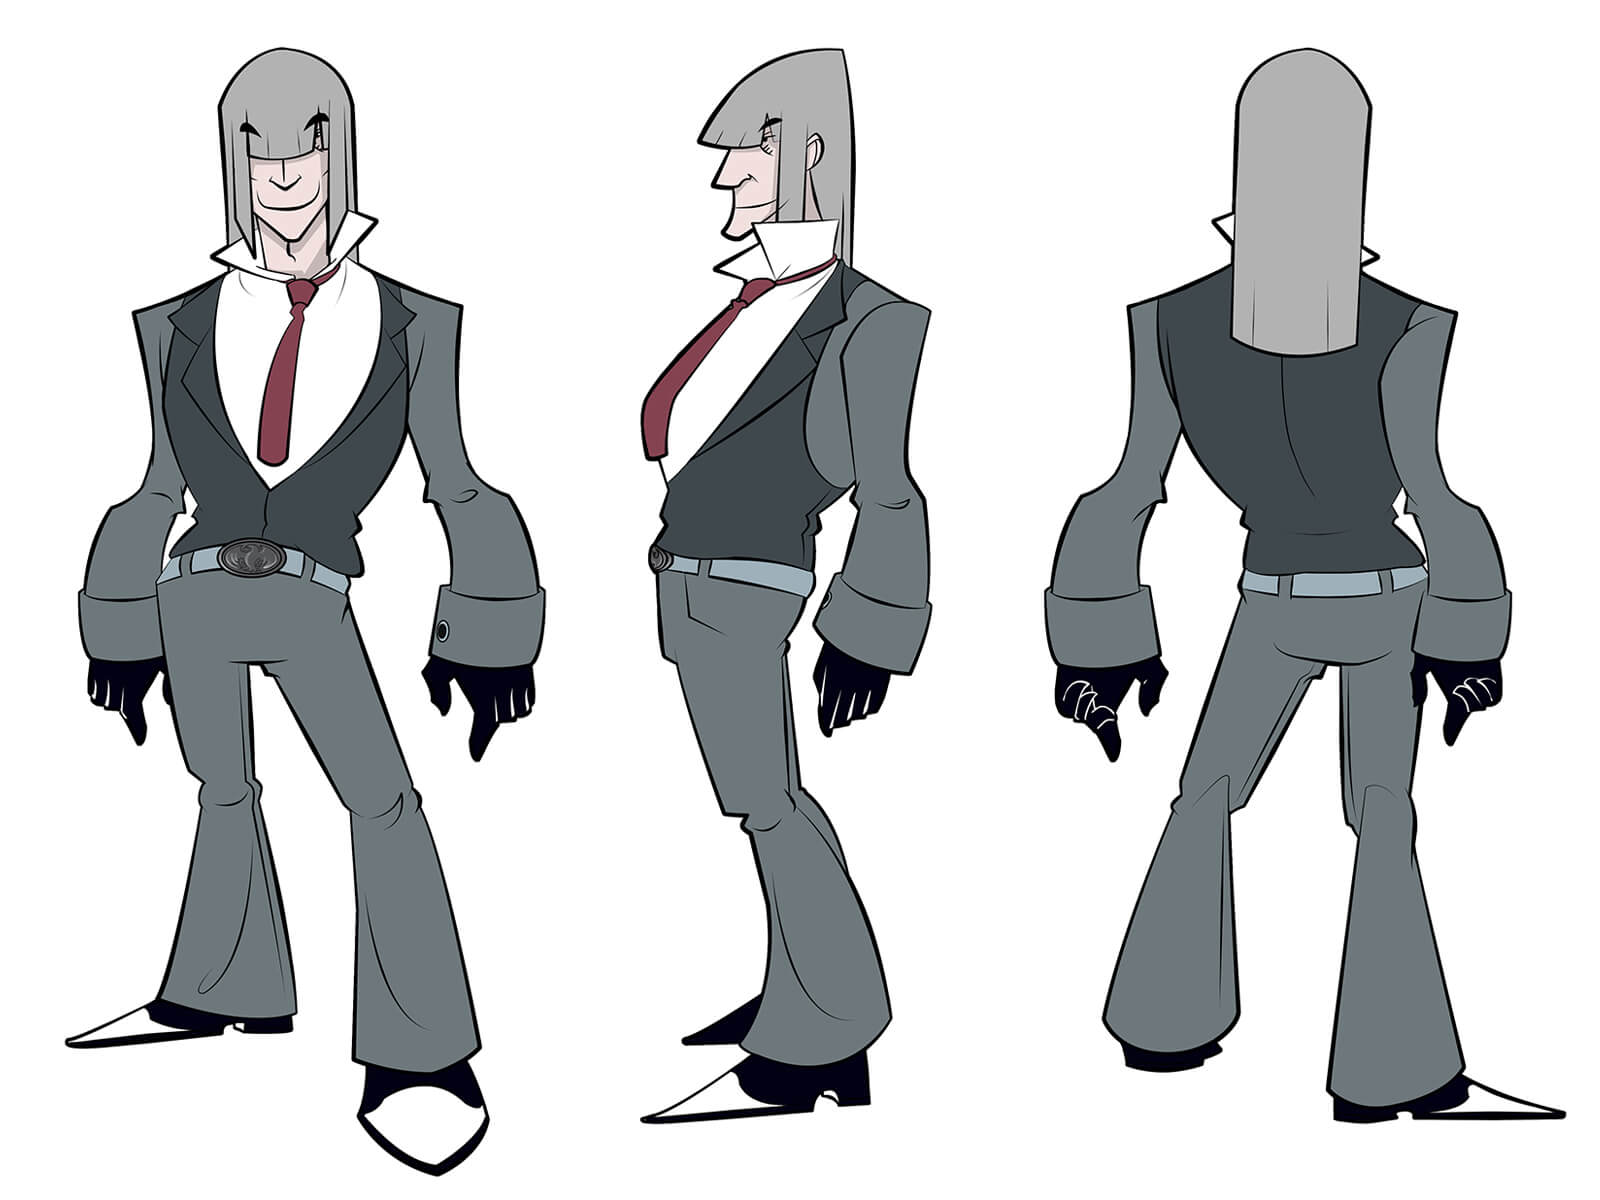 Turnaround sketches of a man with shoulder-length gray hair in a charcoal suit, standing with his torso jutting forward.